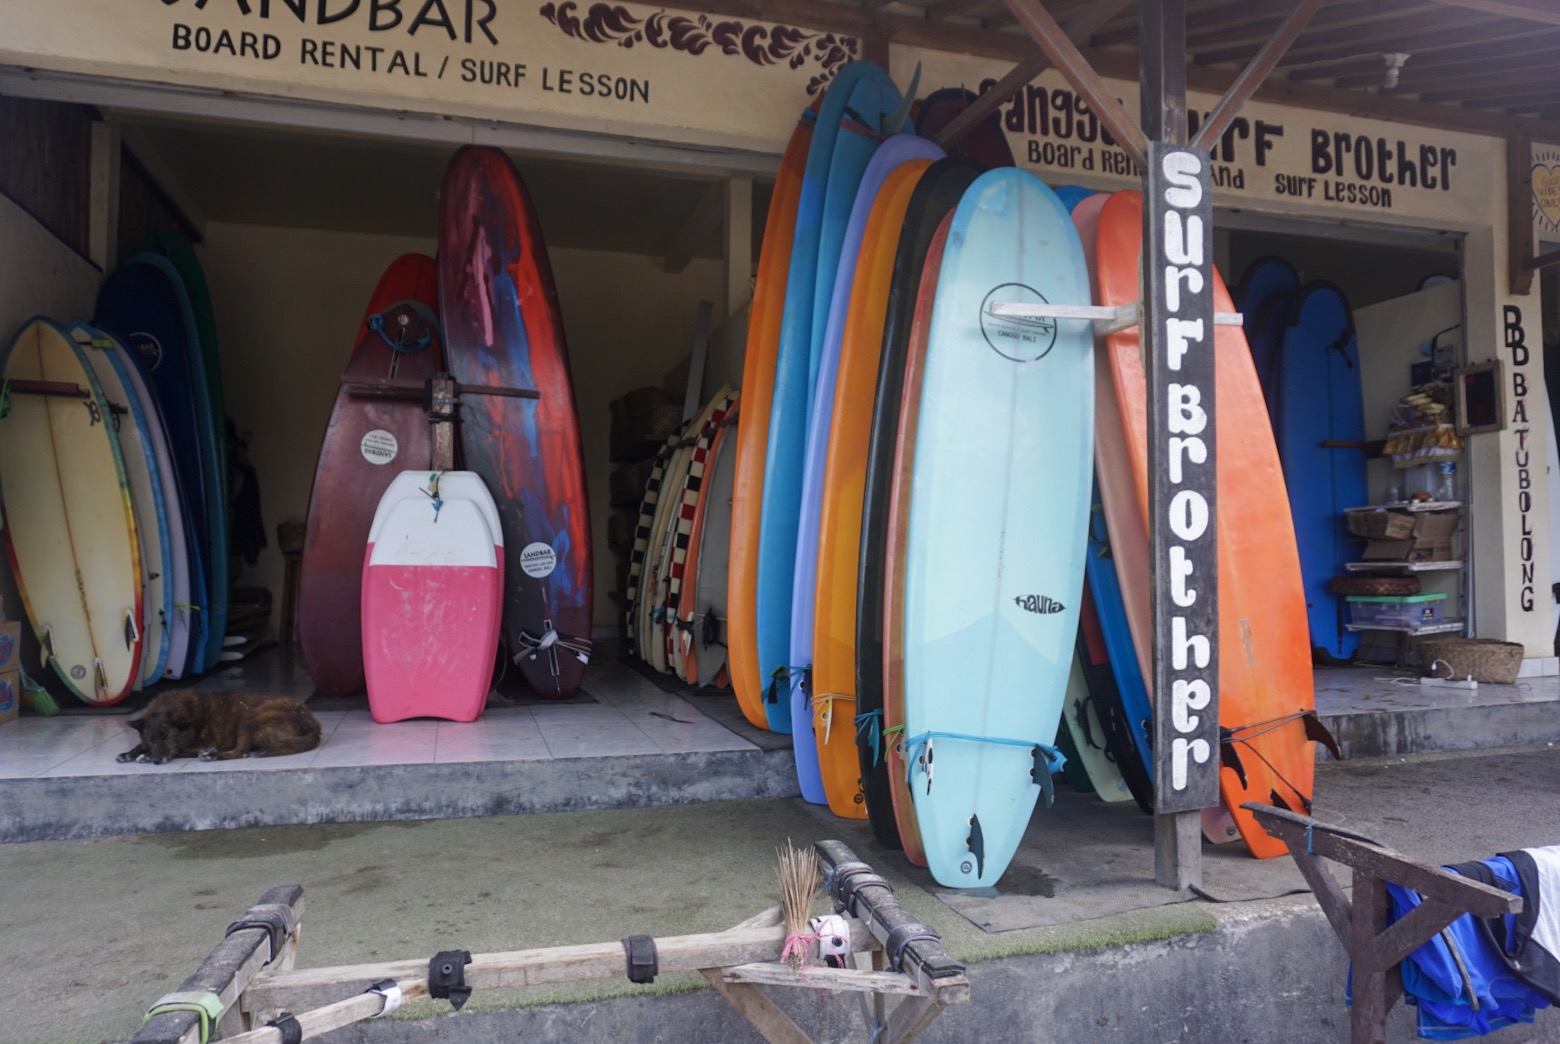 surboards stacked up for hire with a brown dog resting nearby